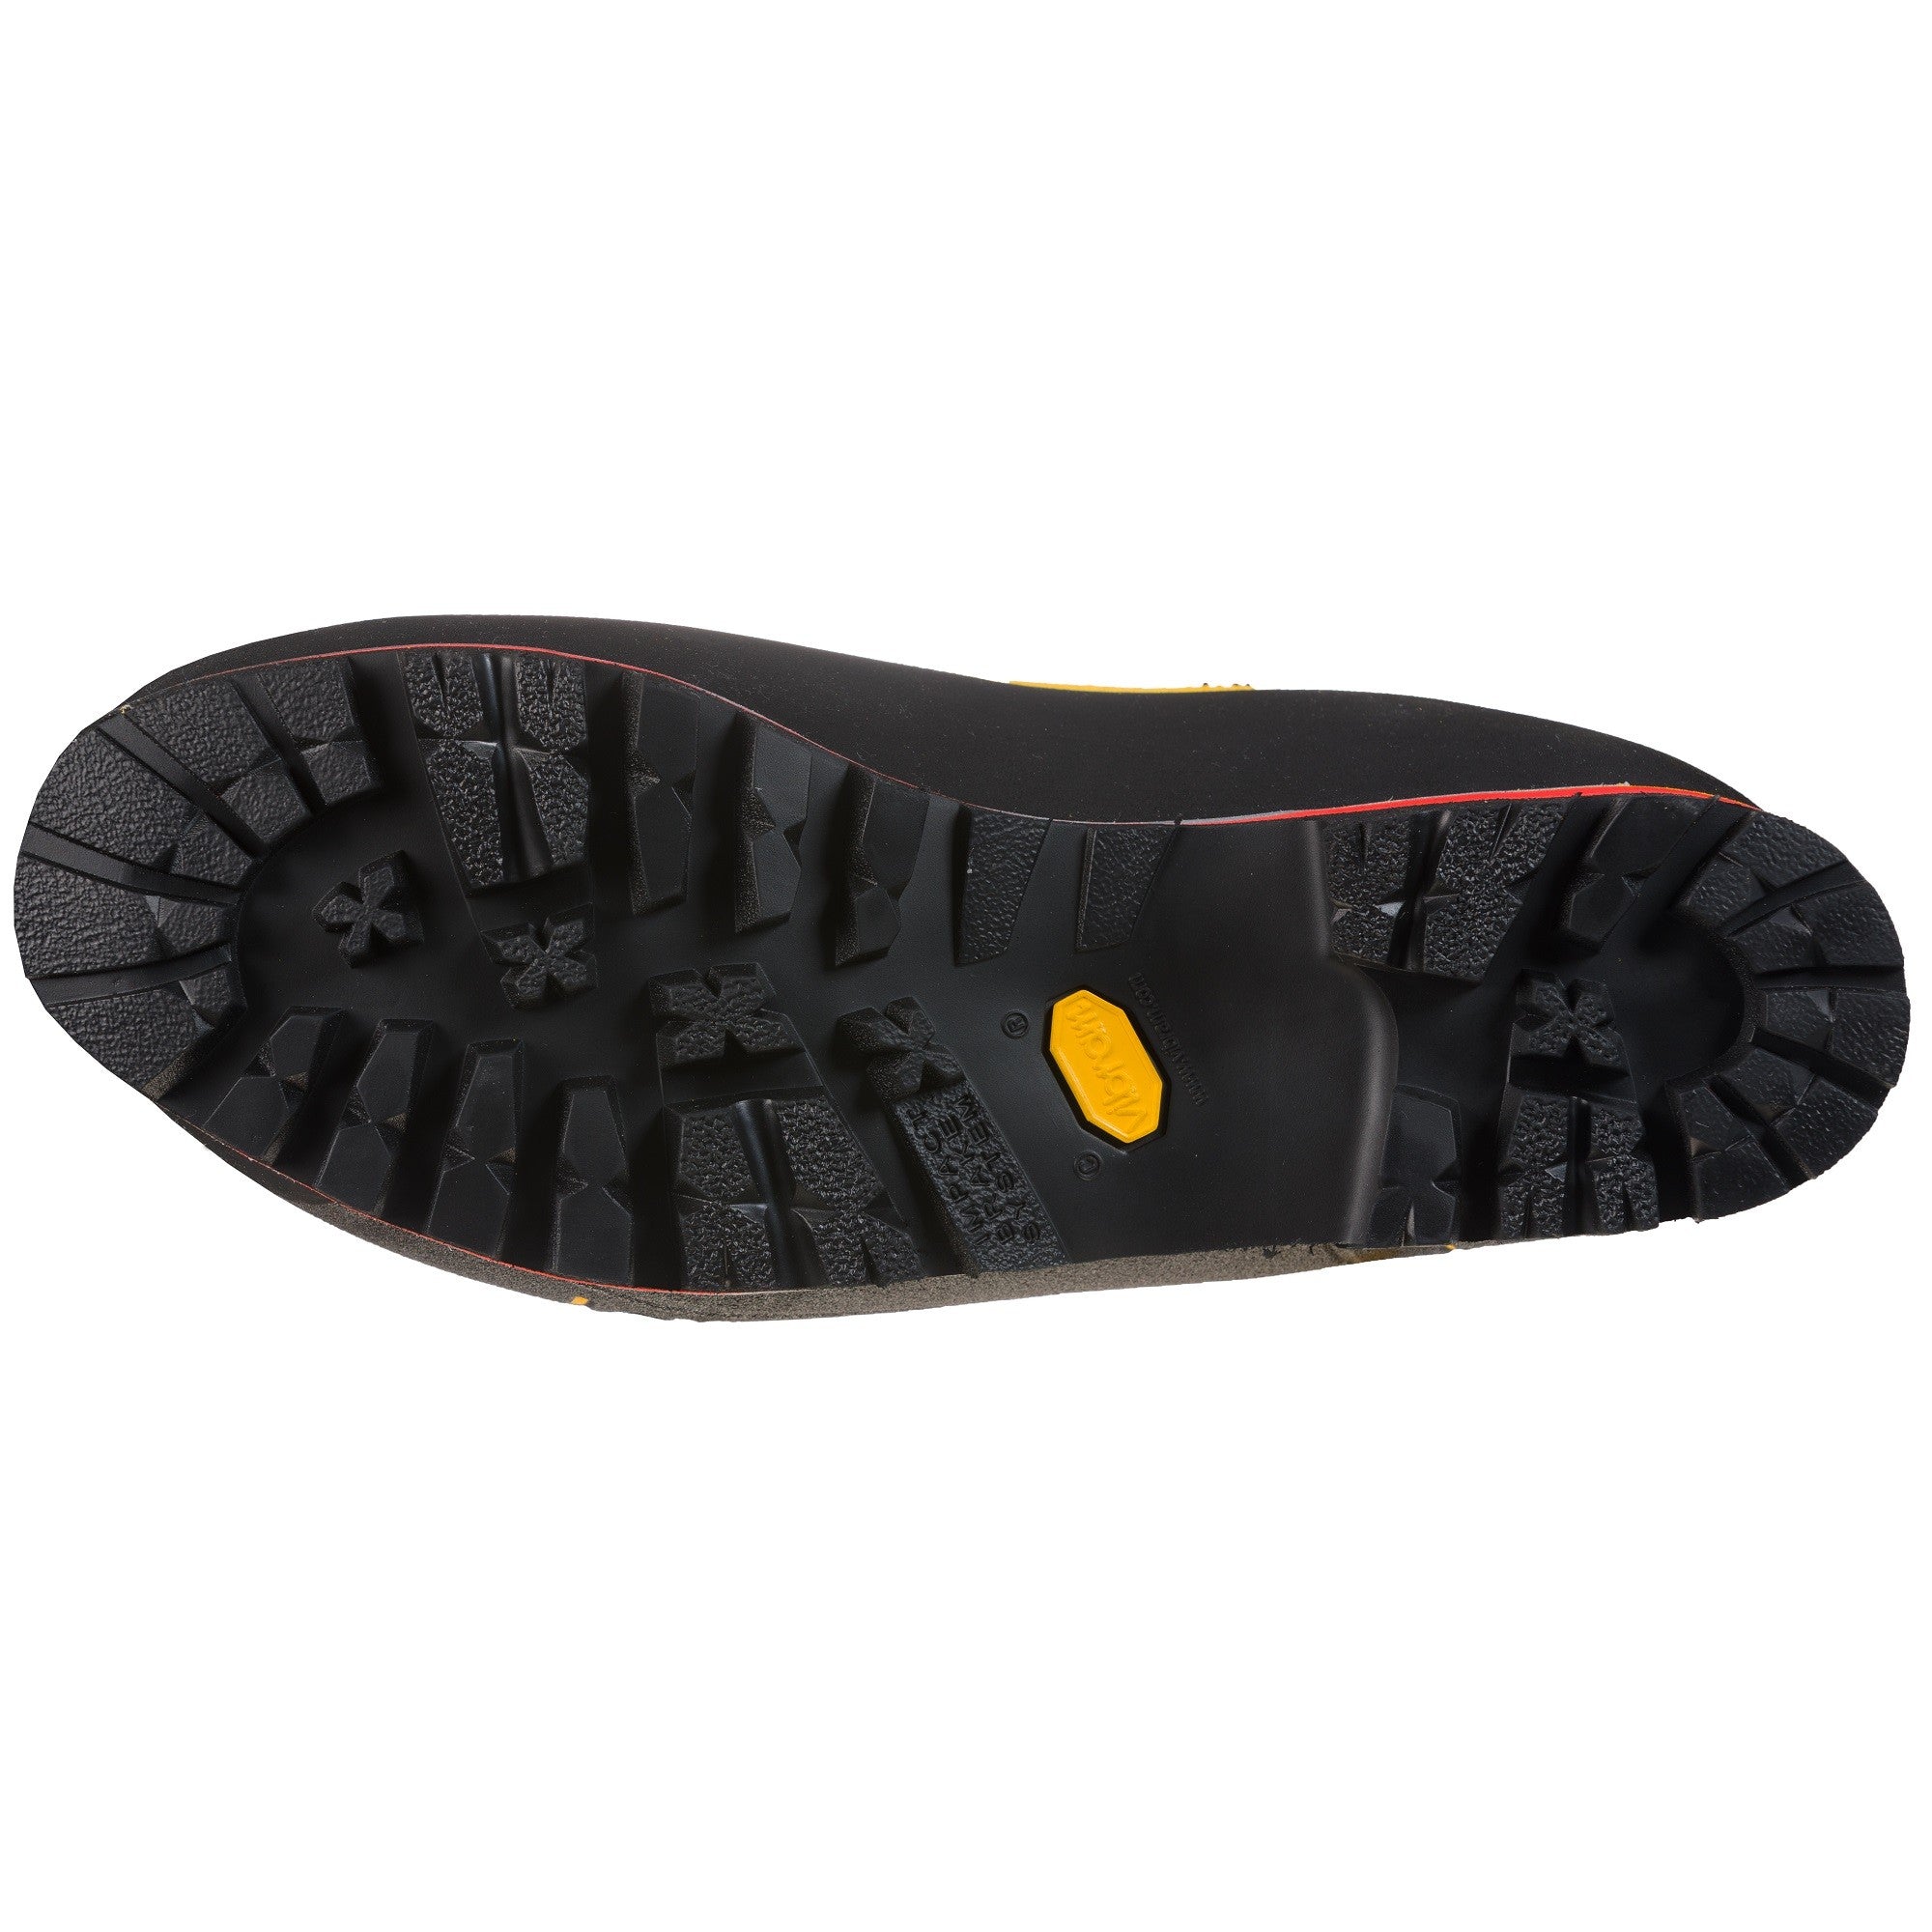 La Sportiva Nepal Cube GTX in Yellow, Black and Red